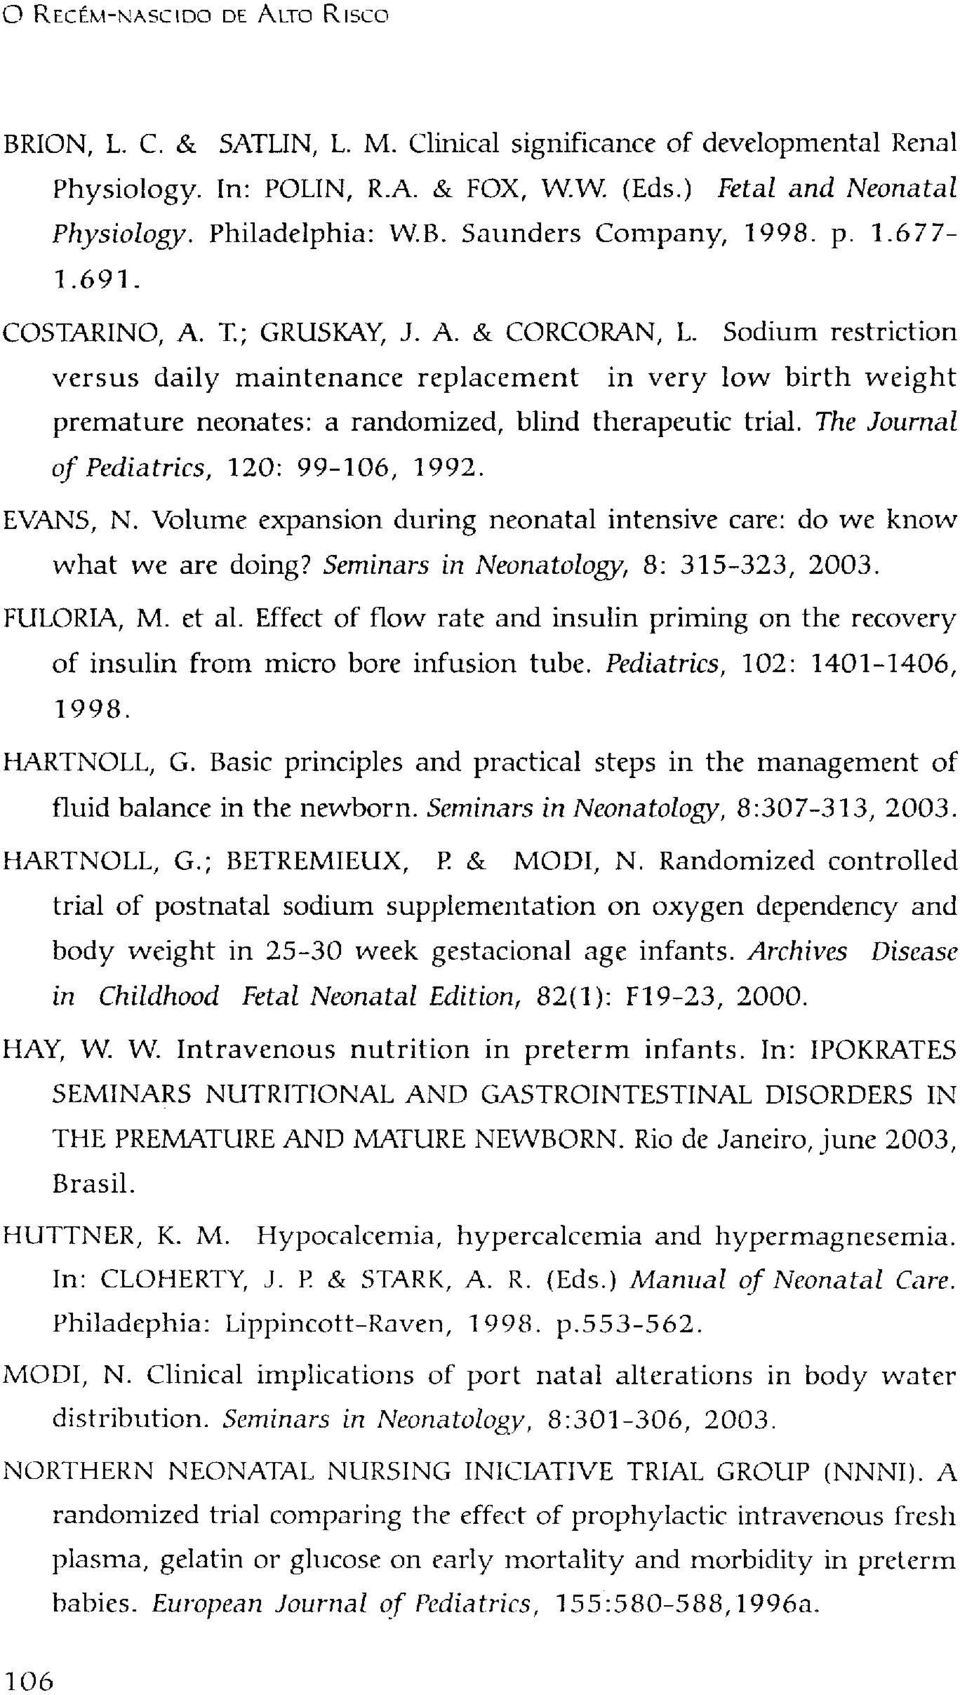 The Journal of Pediatrics, 120: 99-106, 1992. EVANS, N. Volume expansion during neonatal intensive care: do we know what we are doing? Seminars in Neonatology, 8: 315-323, 2003. FULORIA, M. et al.